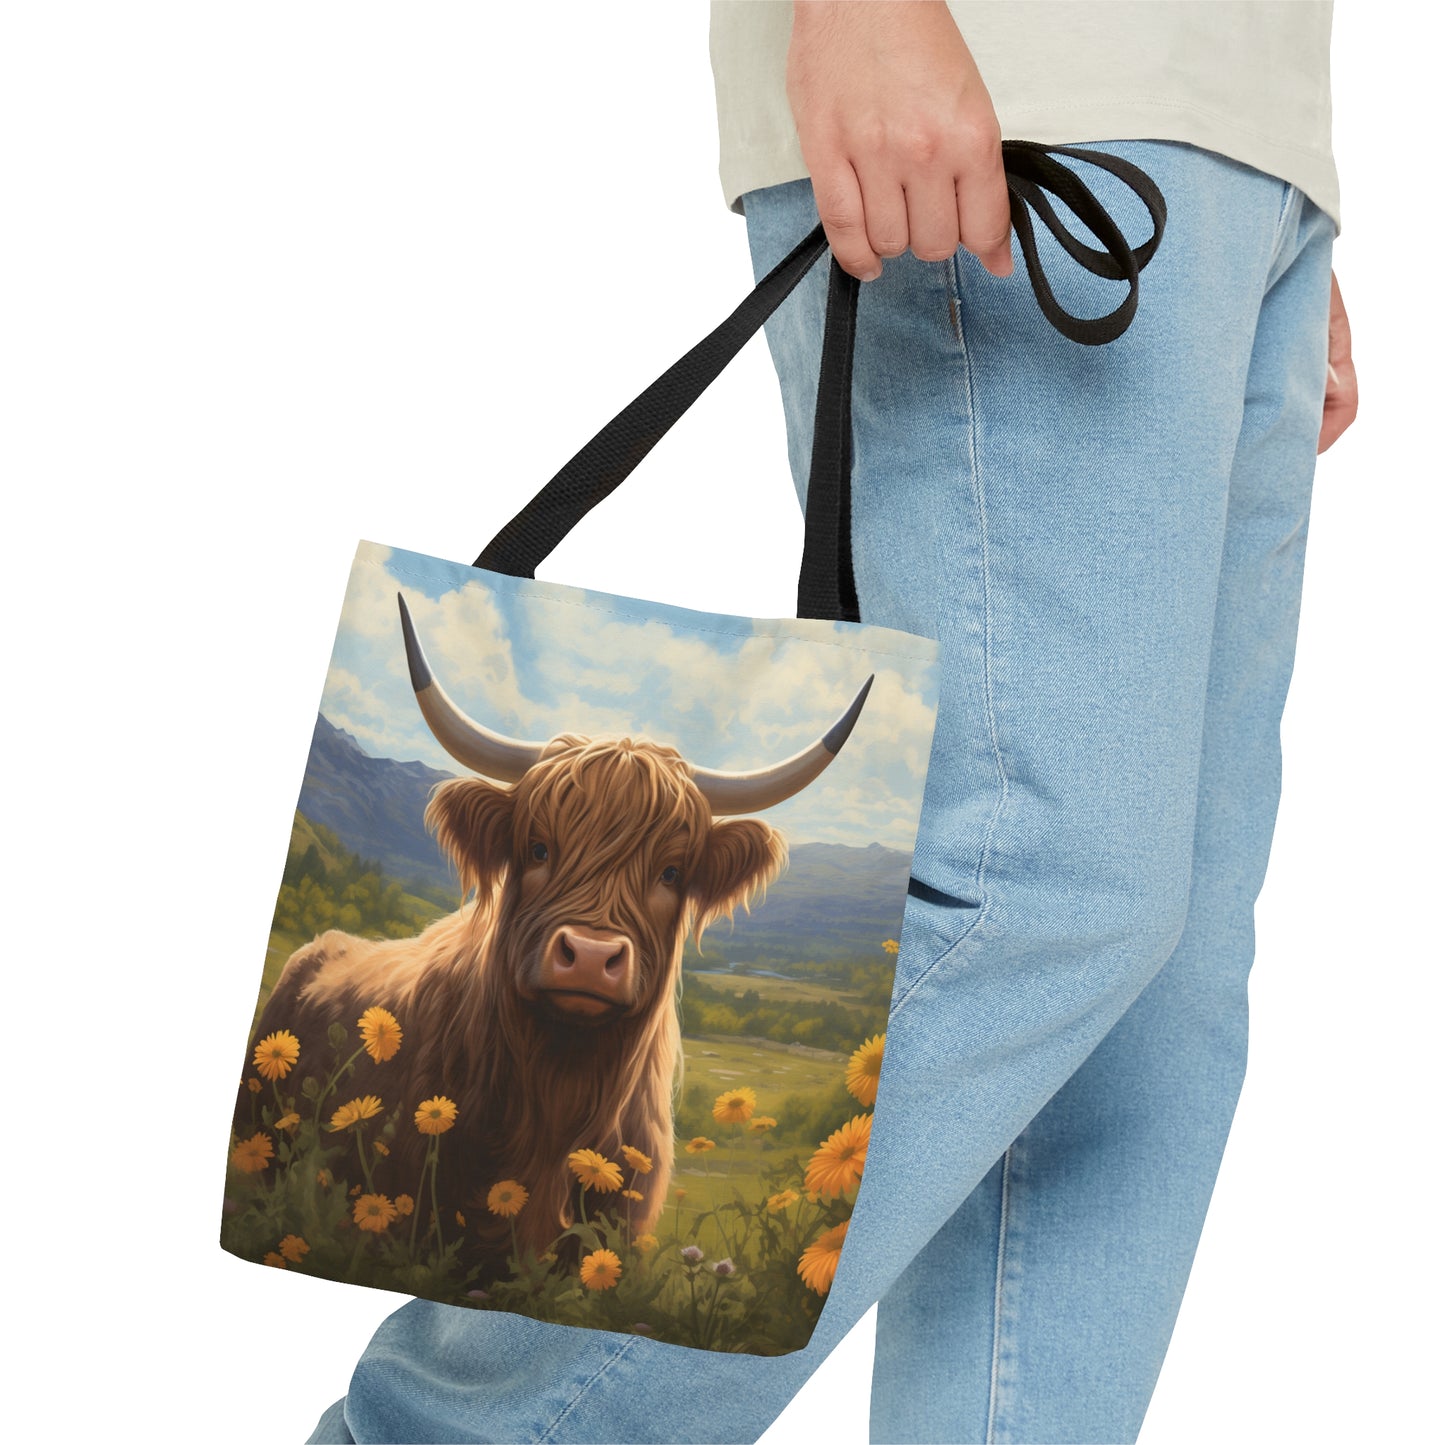 Highland Cow in Yellow Flower Field Tote Bag